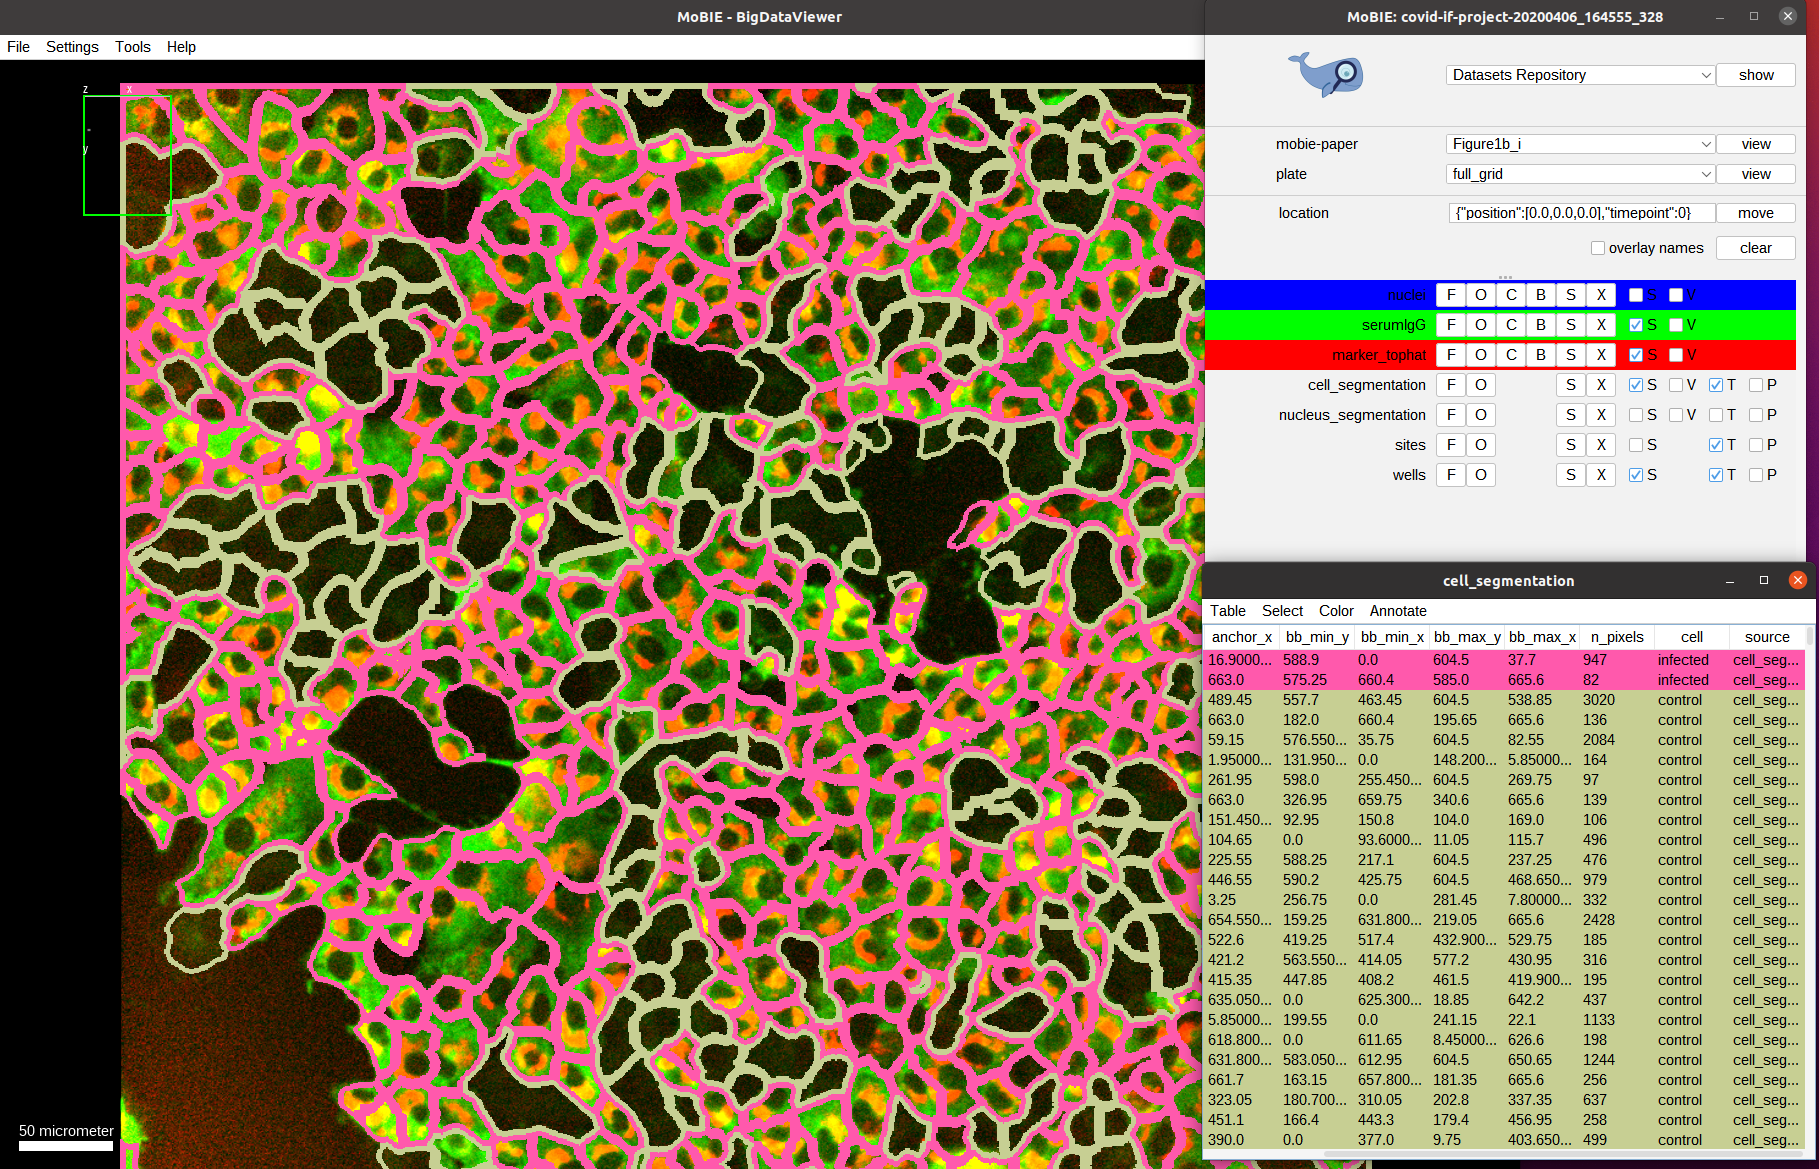 Cell segmentation overlay with infection classification and serum